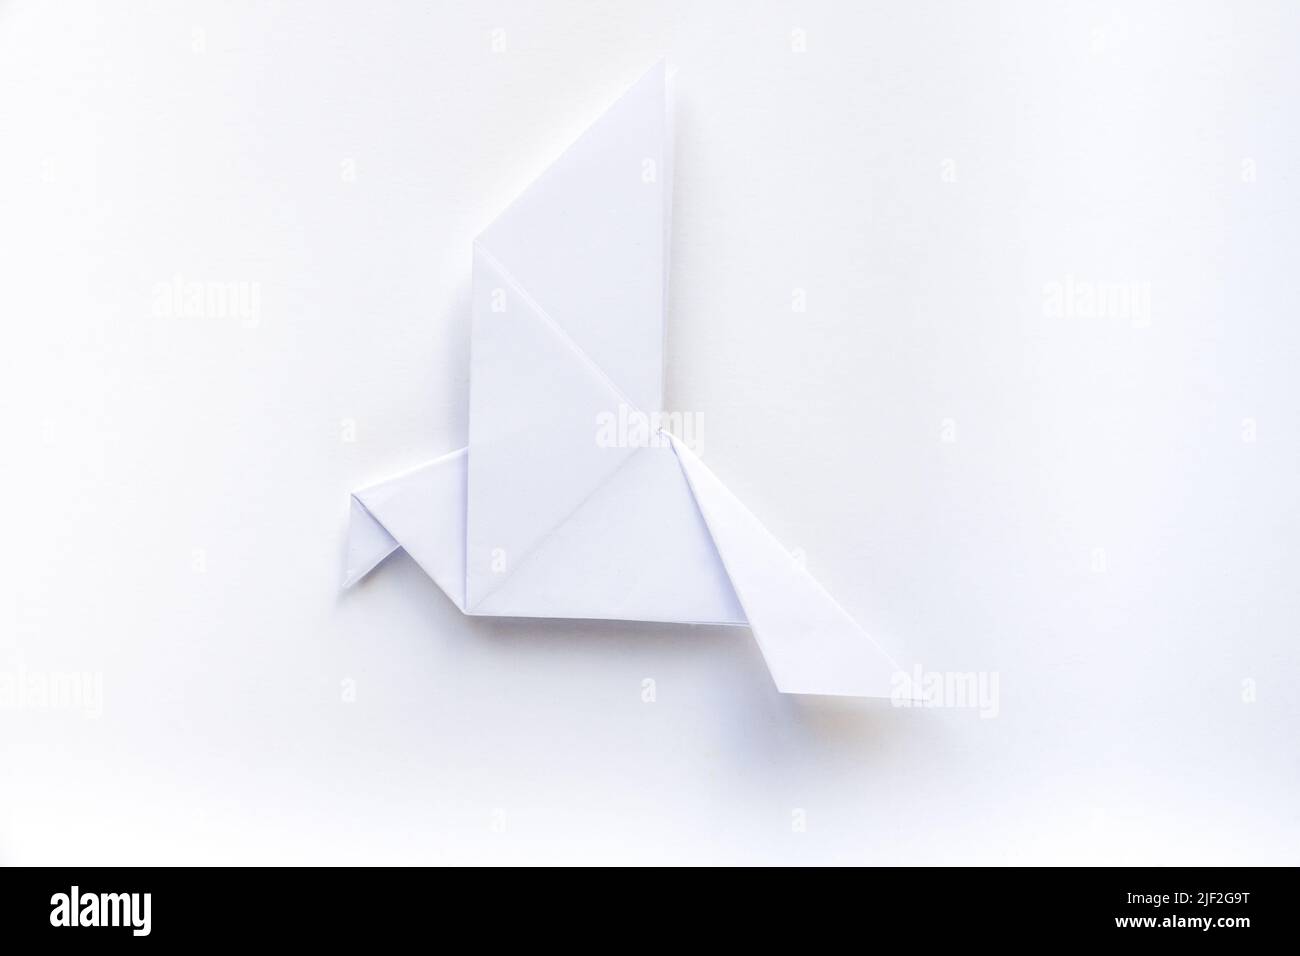 Paper dove origami isolated on a blank white background. Stock Photo